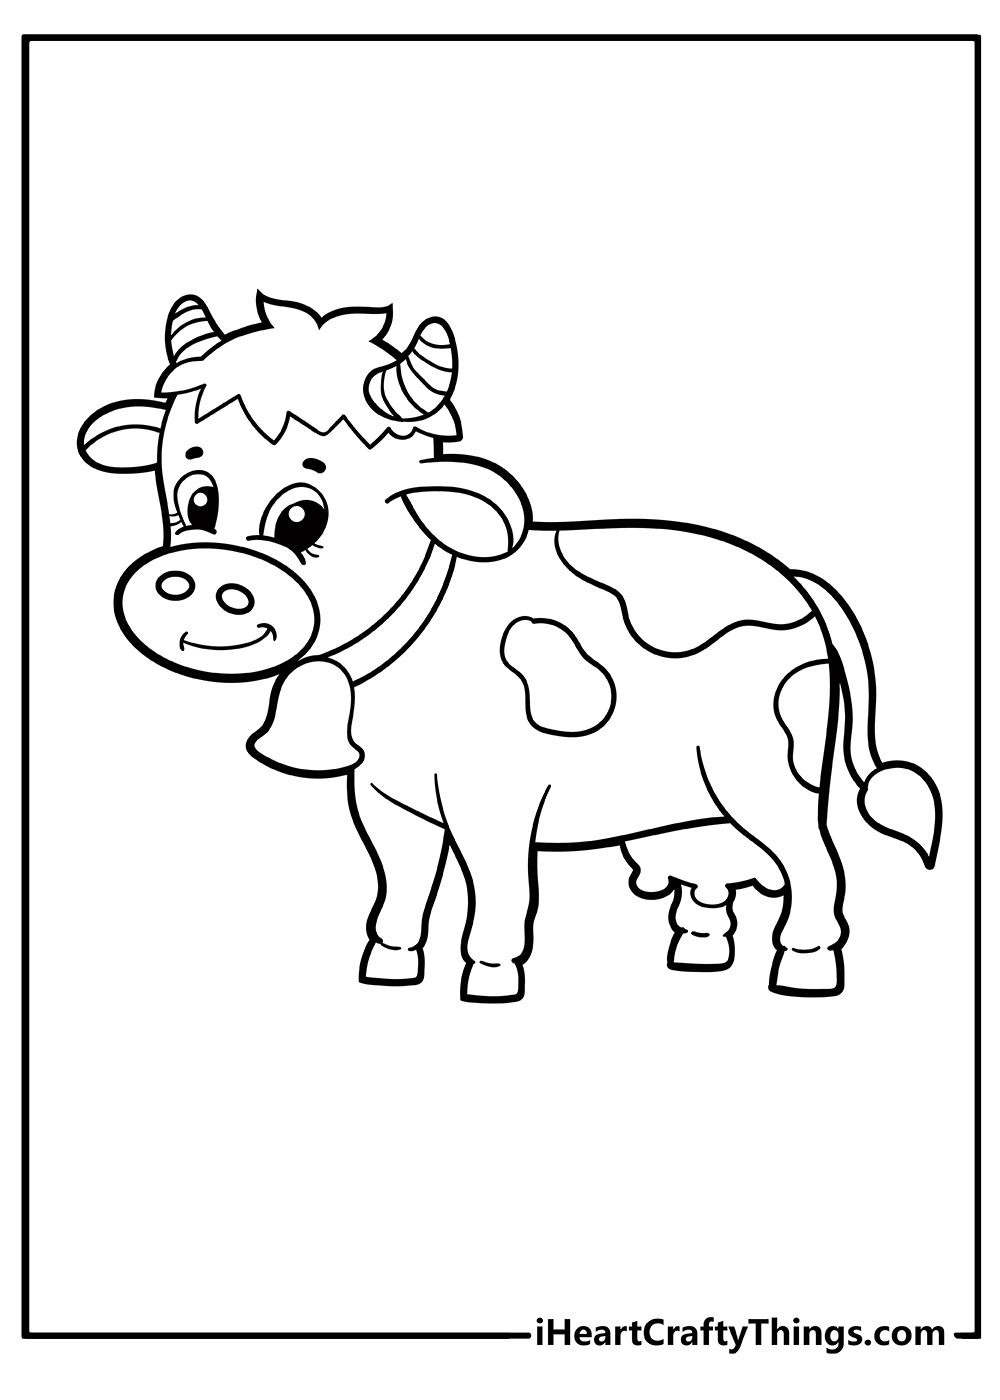 Cow coloring pages free printables